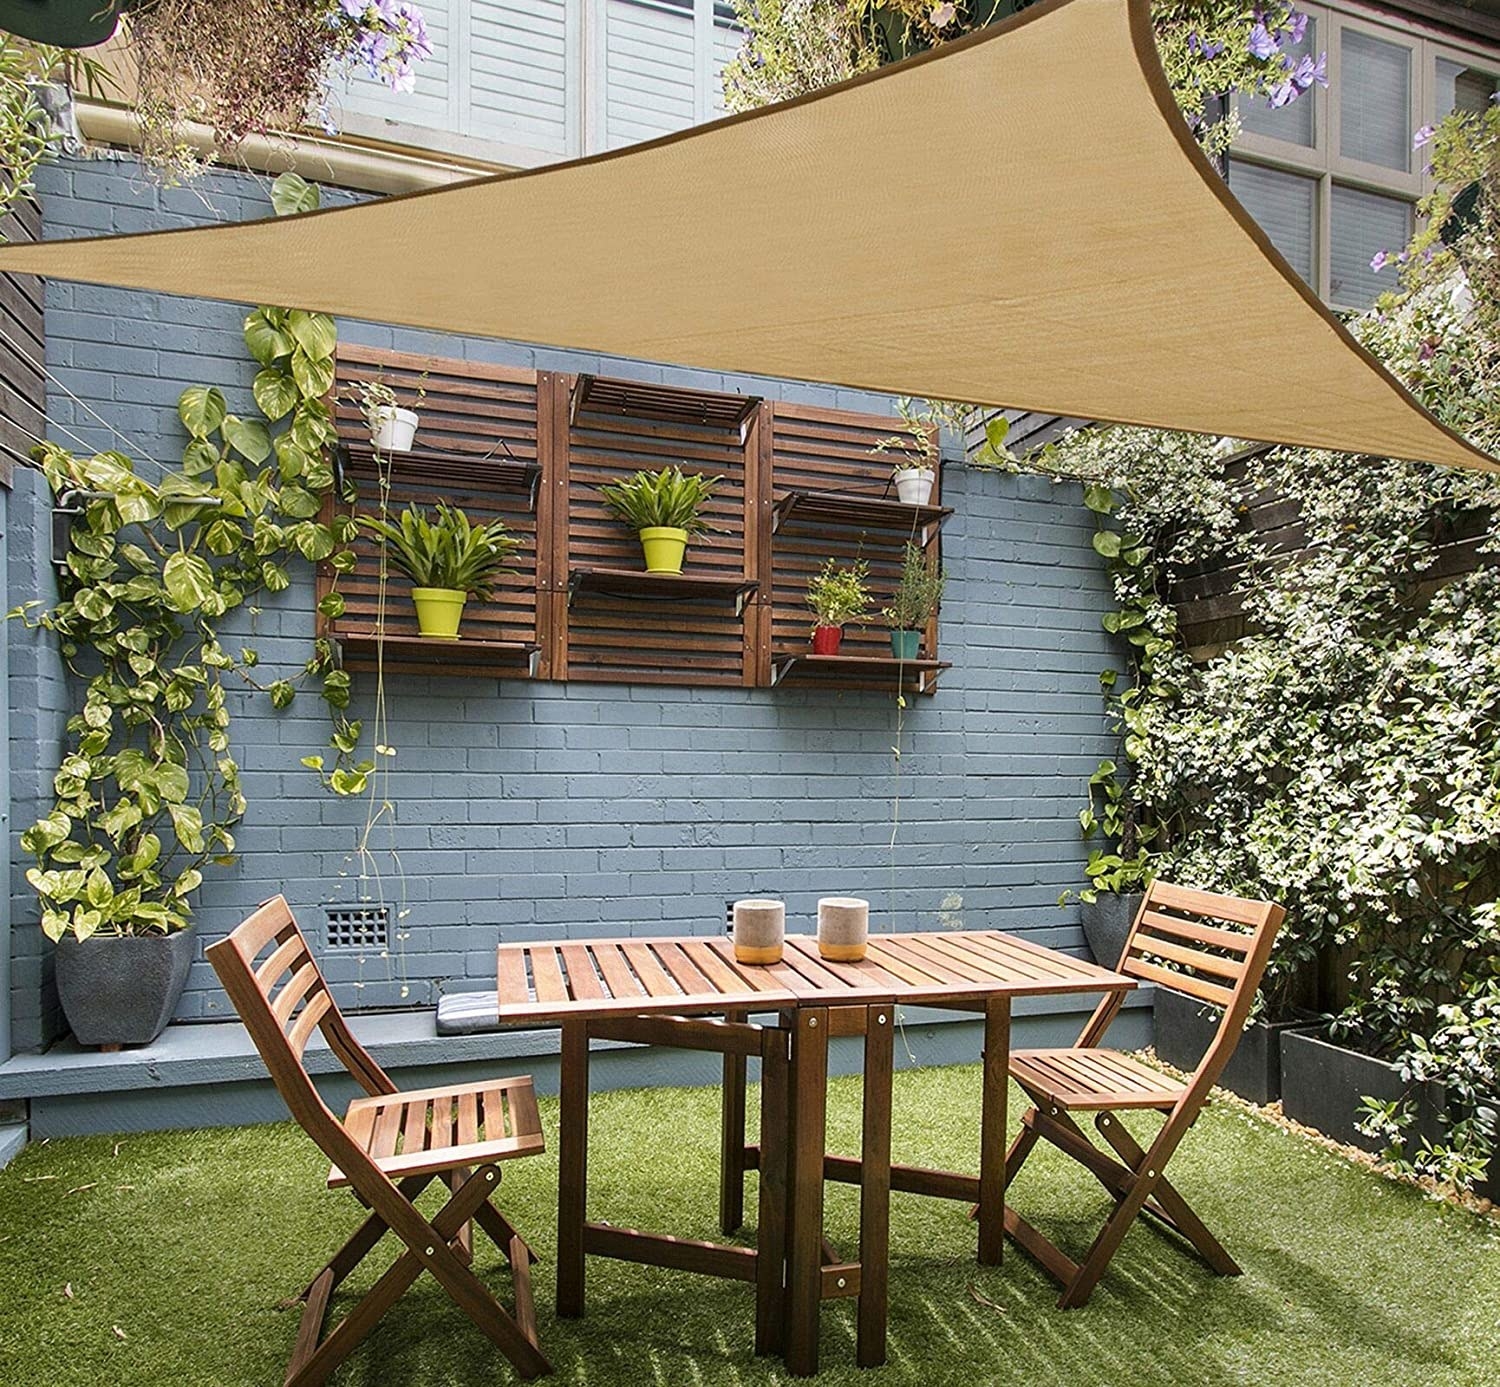 tan sunshade triangle above wooden table and chairs set on patio with faux grass